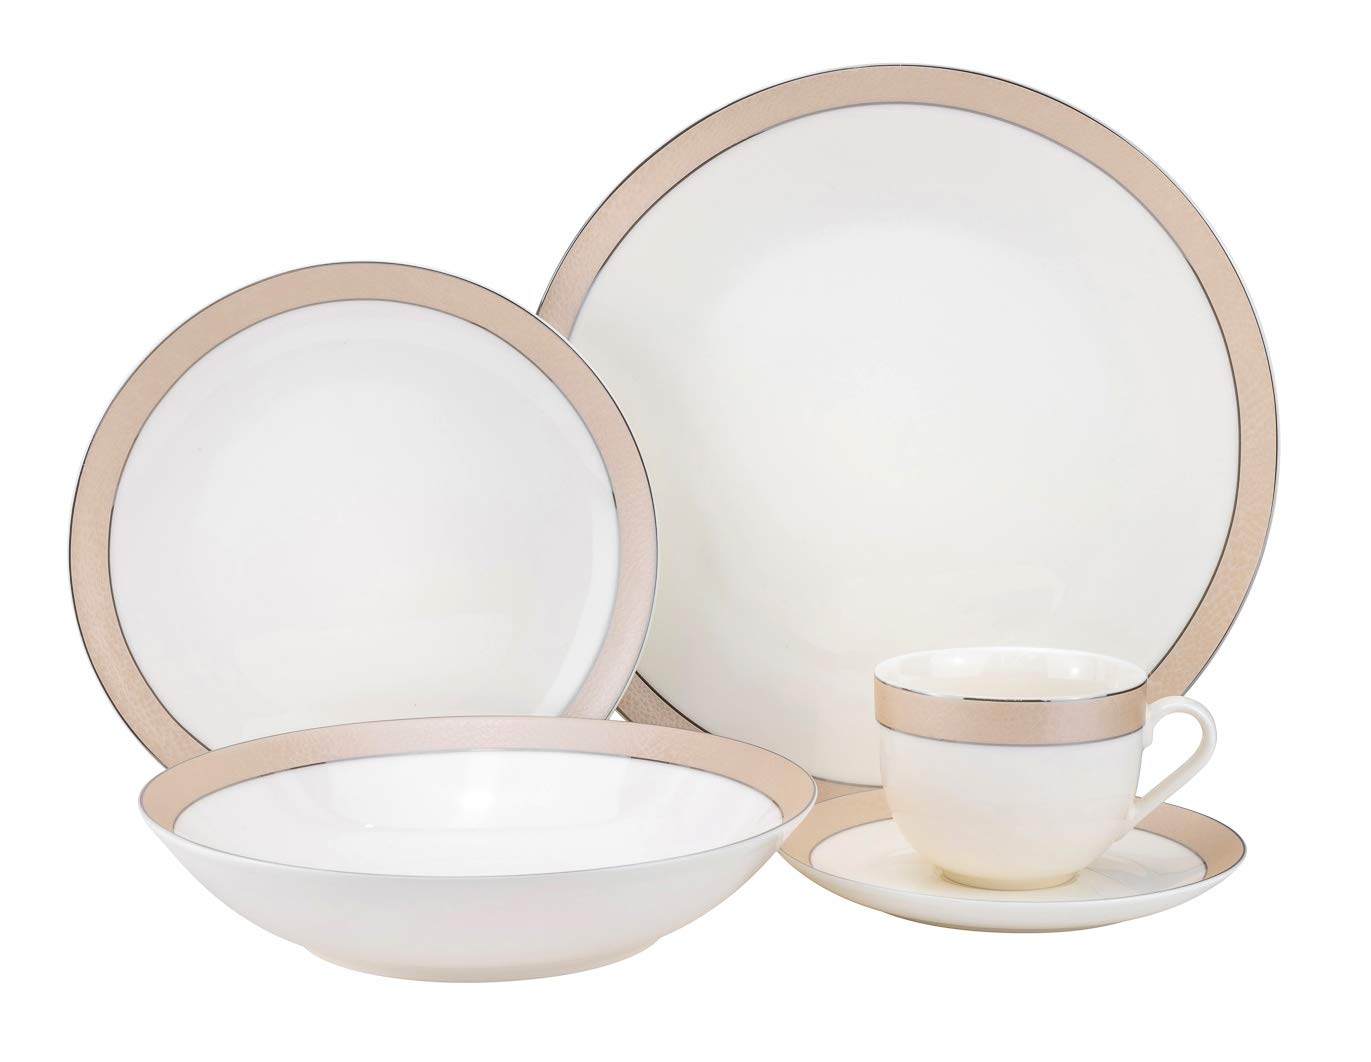 20-pc. Dinner Set Service for 4, 24K Gold-plated Luxury Bone China Tableware ("Downtown" 1402P) - image 2 of 2